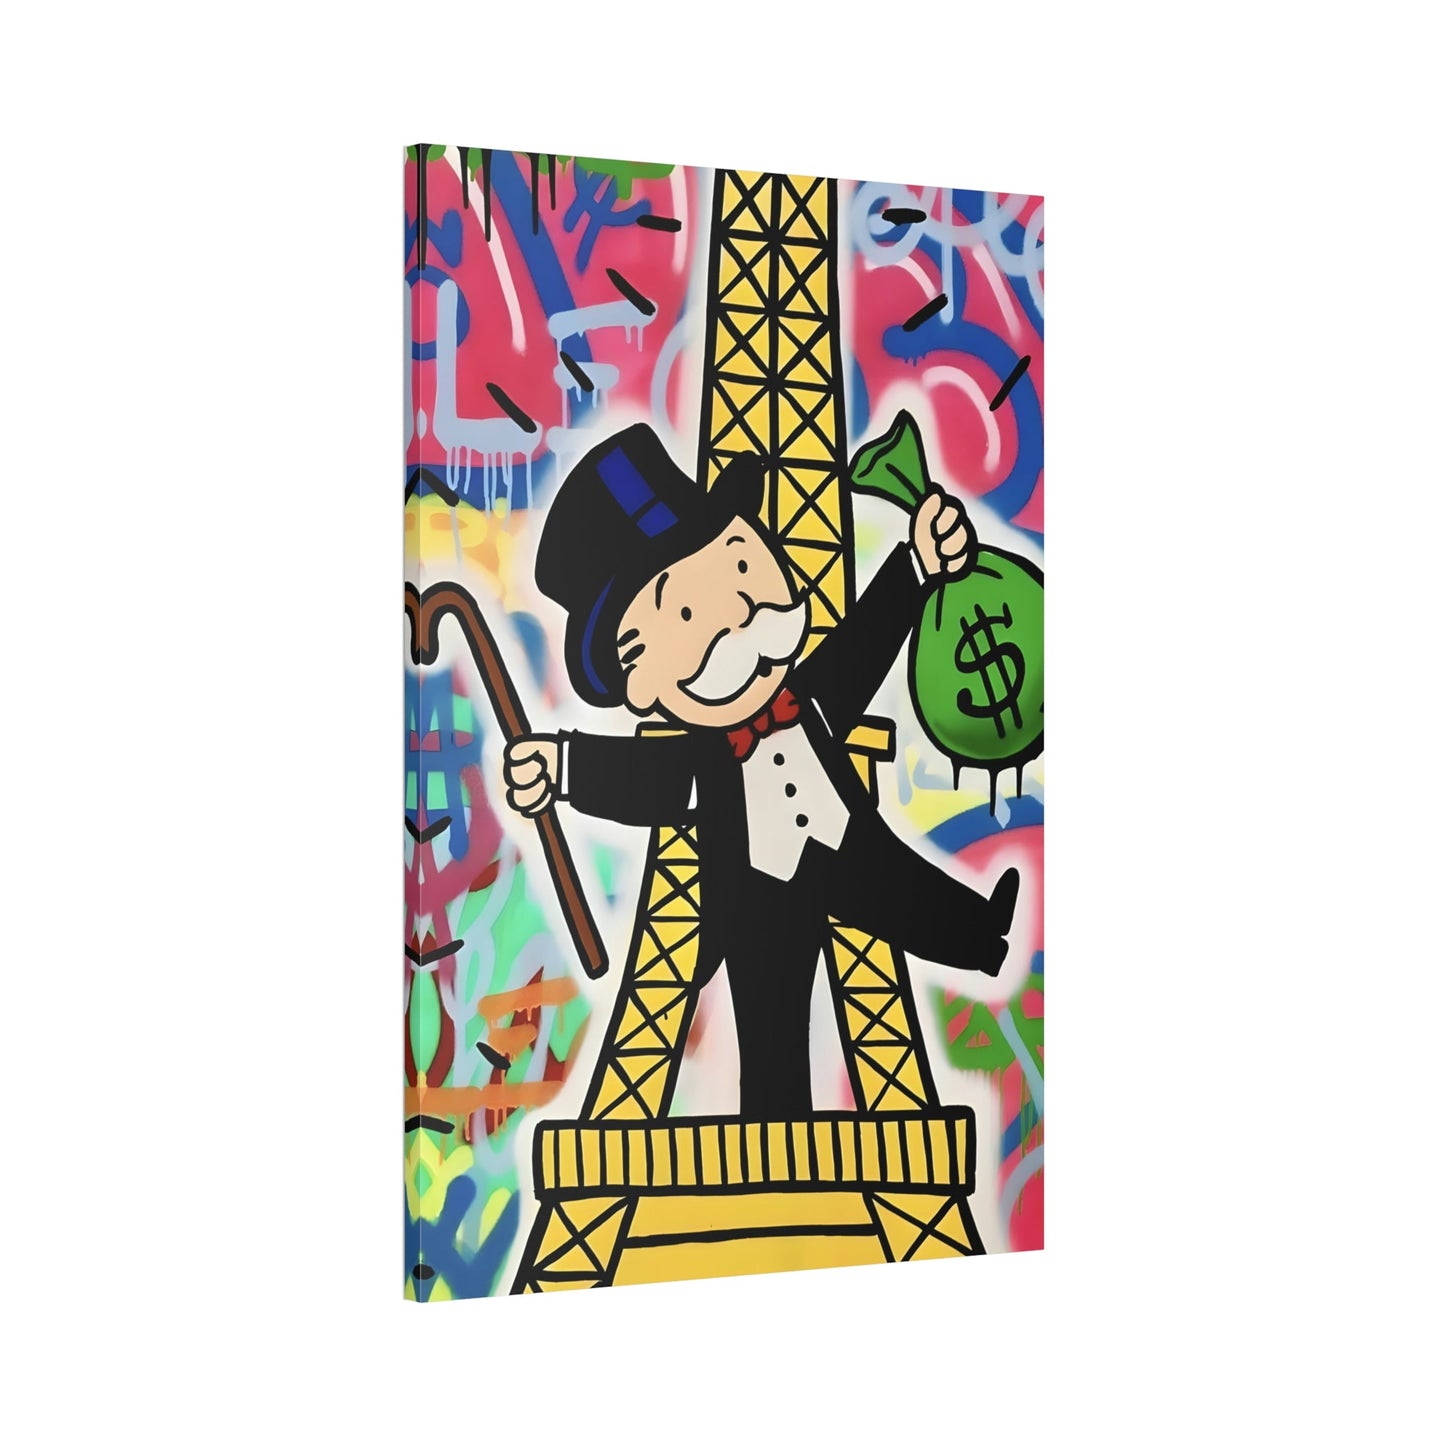 Living Large: Alec Monopoly's Artistic Prints on Framed Canvas Featuring Images of Wealth and Luxury